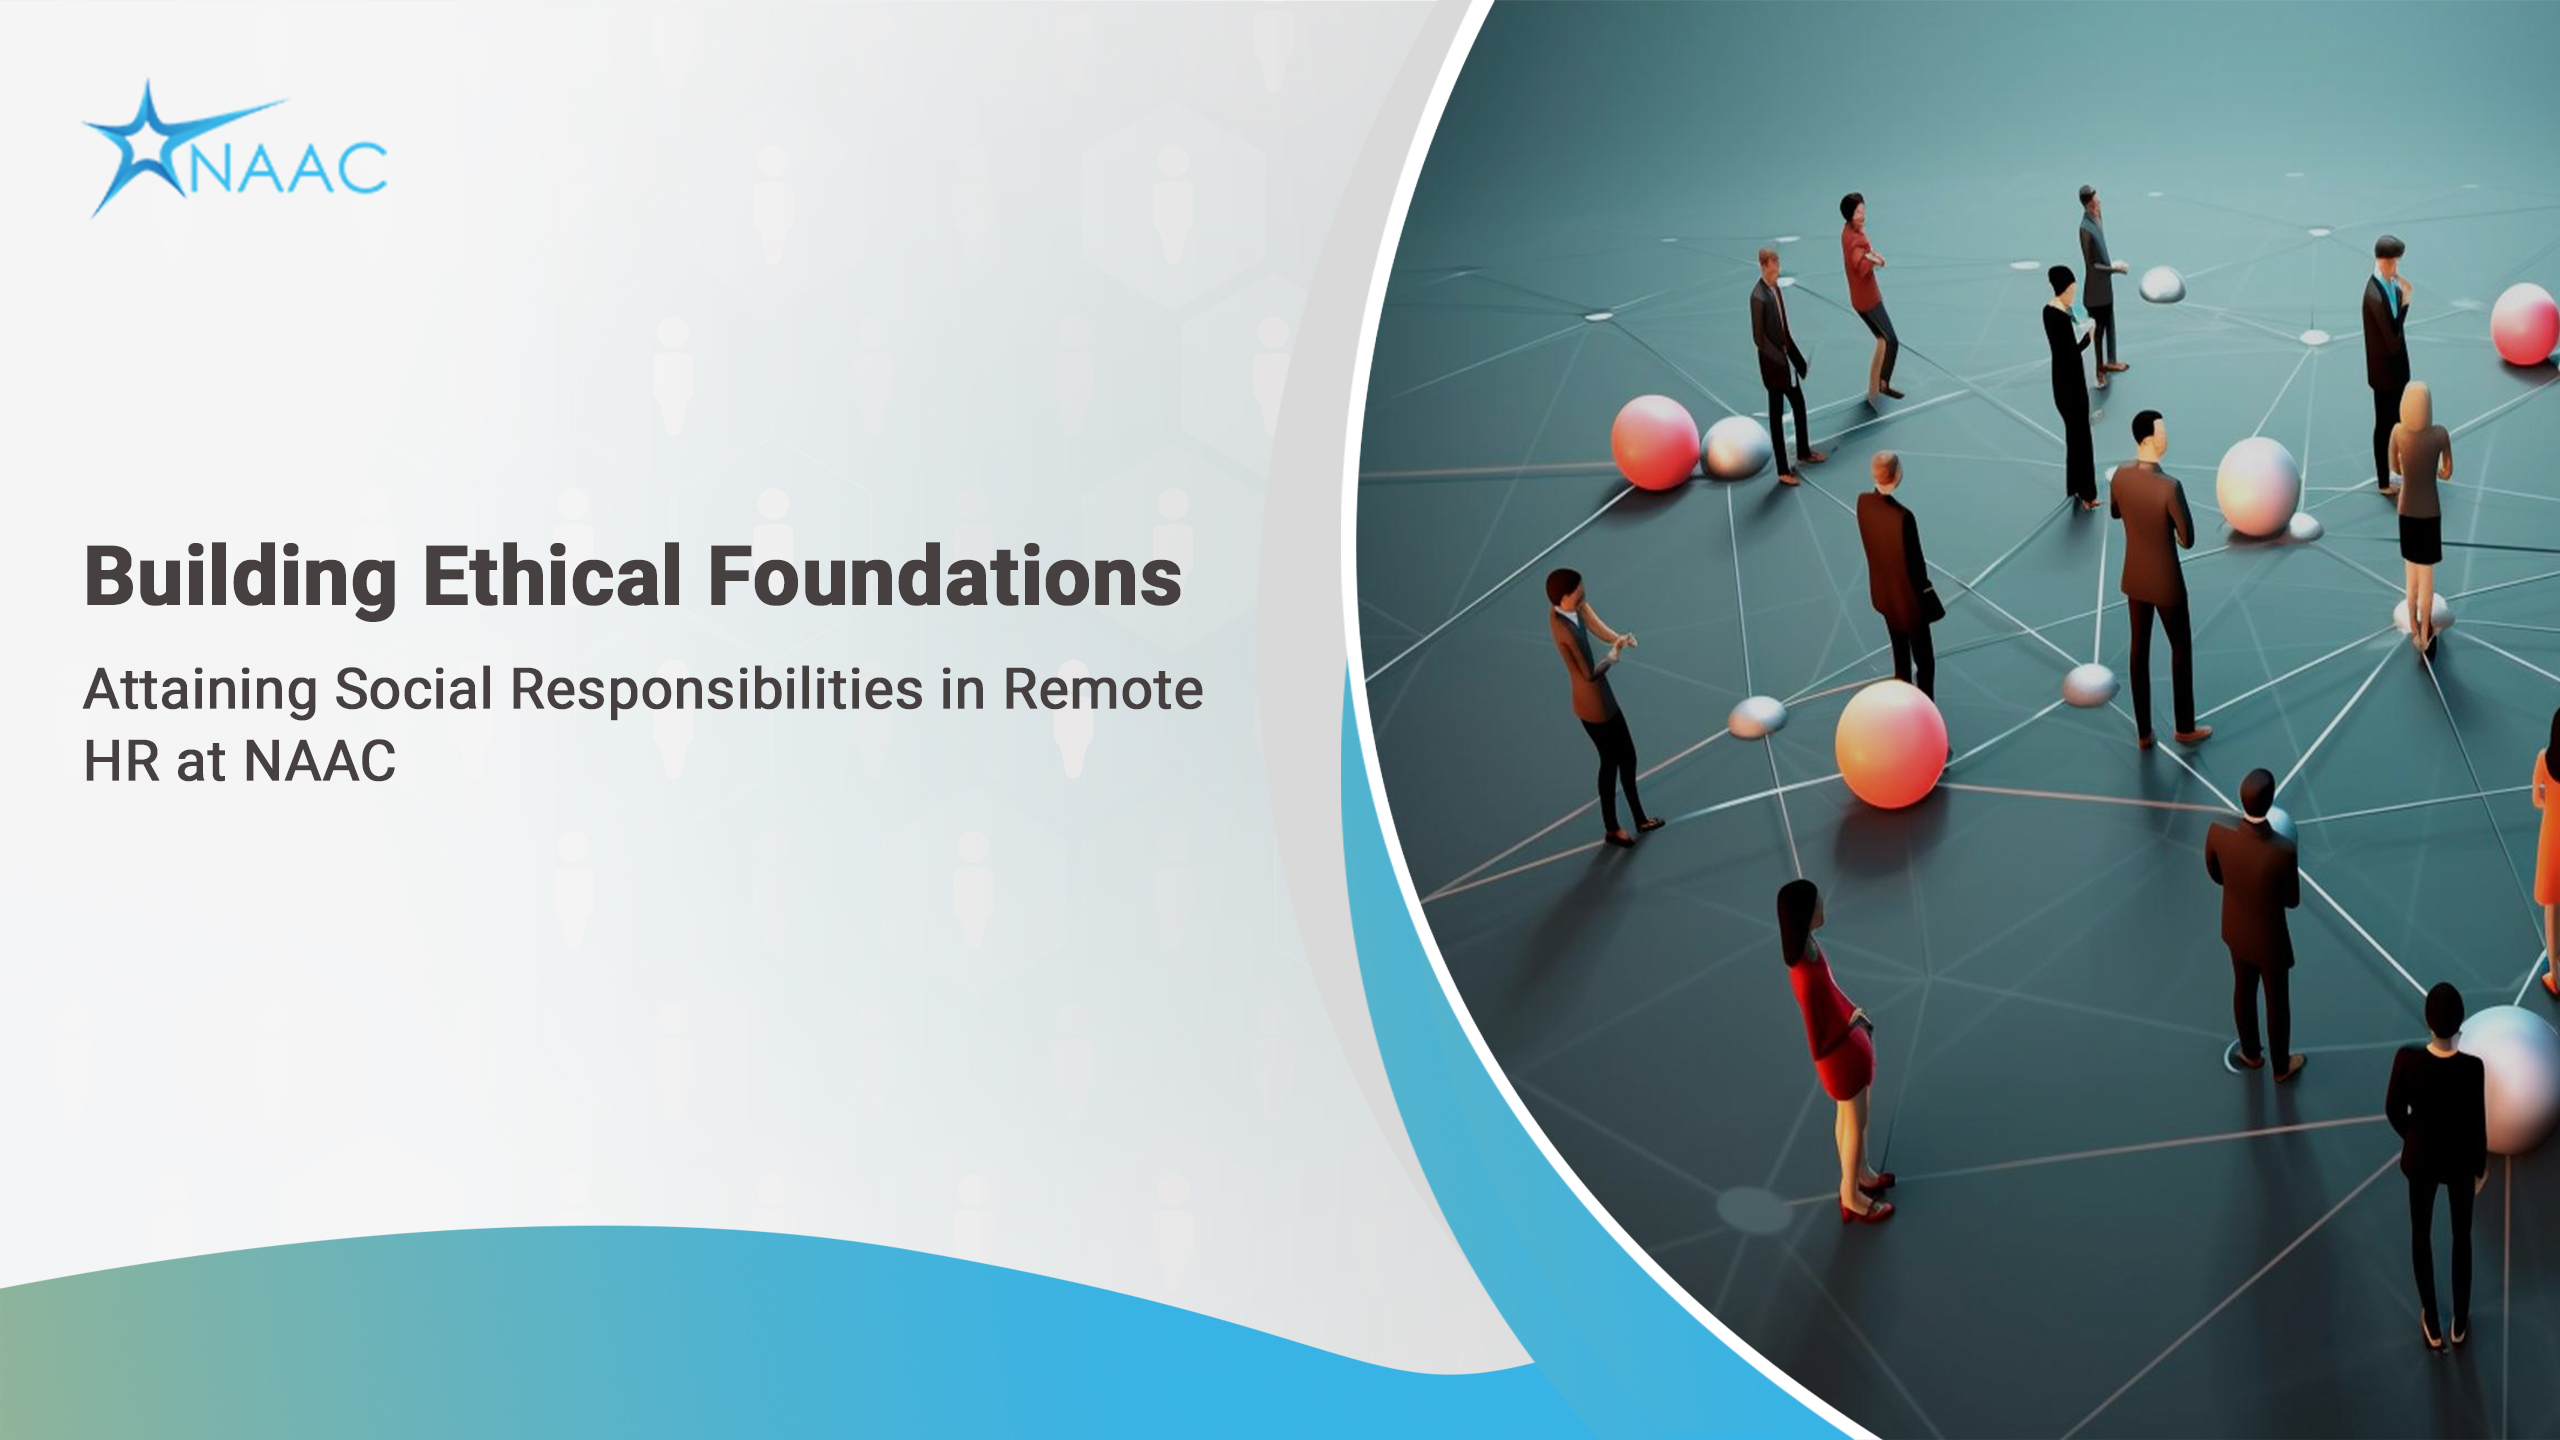 Building Ethical Foundations: Attaining Social Responsibilities in Remote HR at NAAC